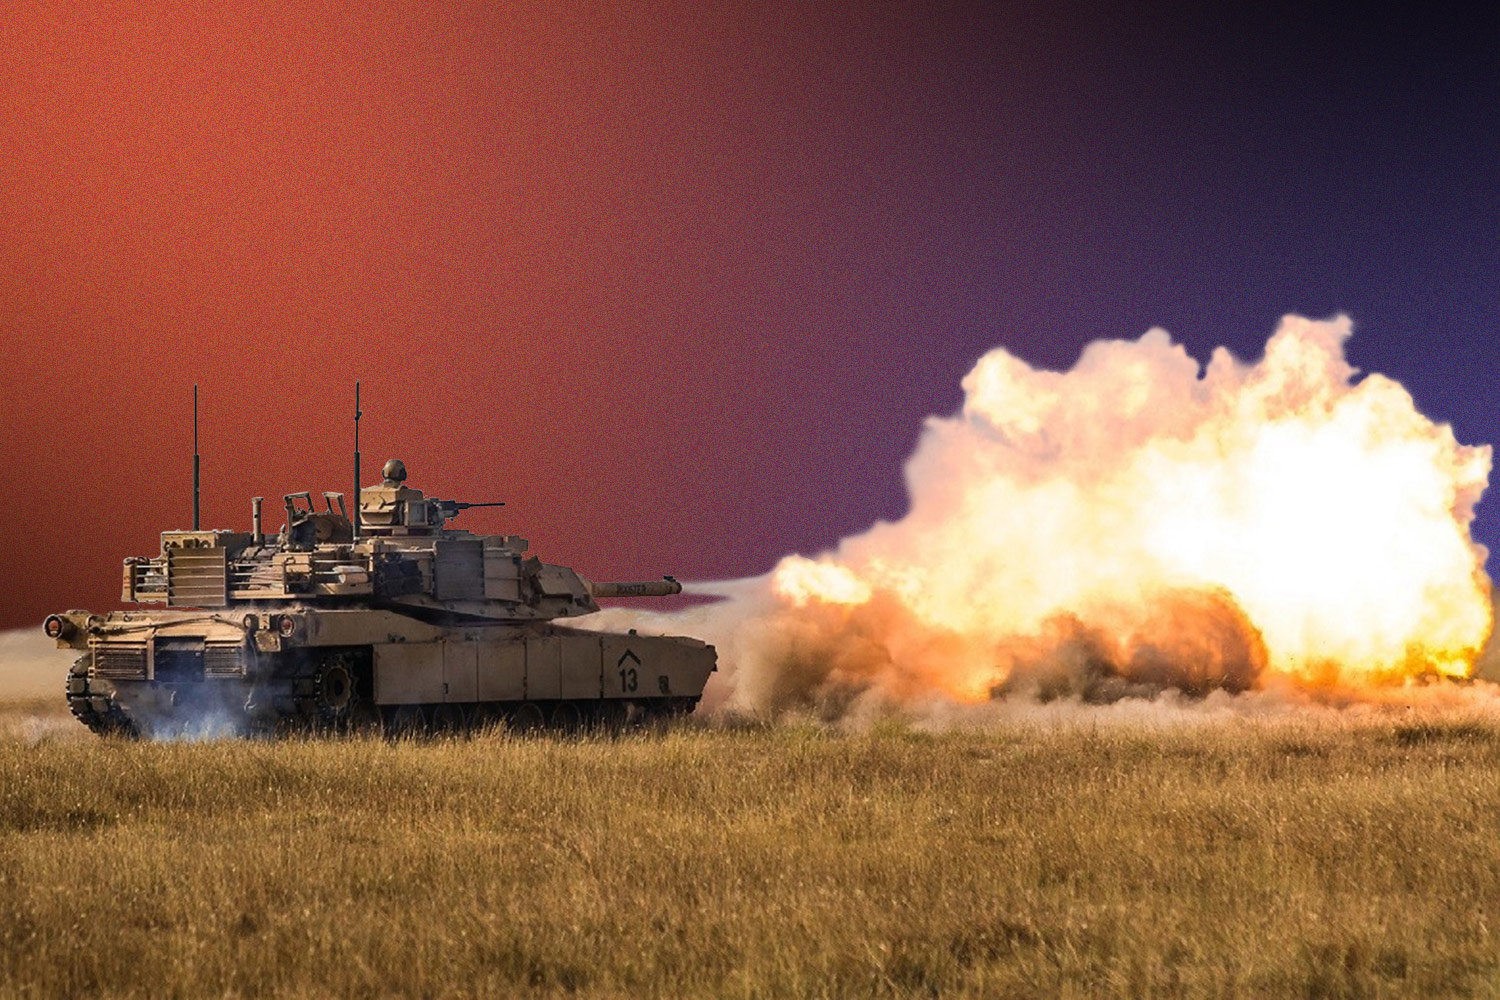 U.S. Army tank firing artillery over a field in Afghanistan on a red, black, and purple background